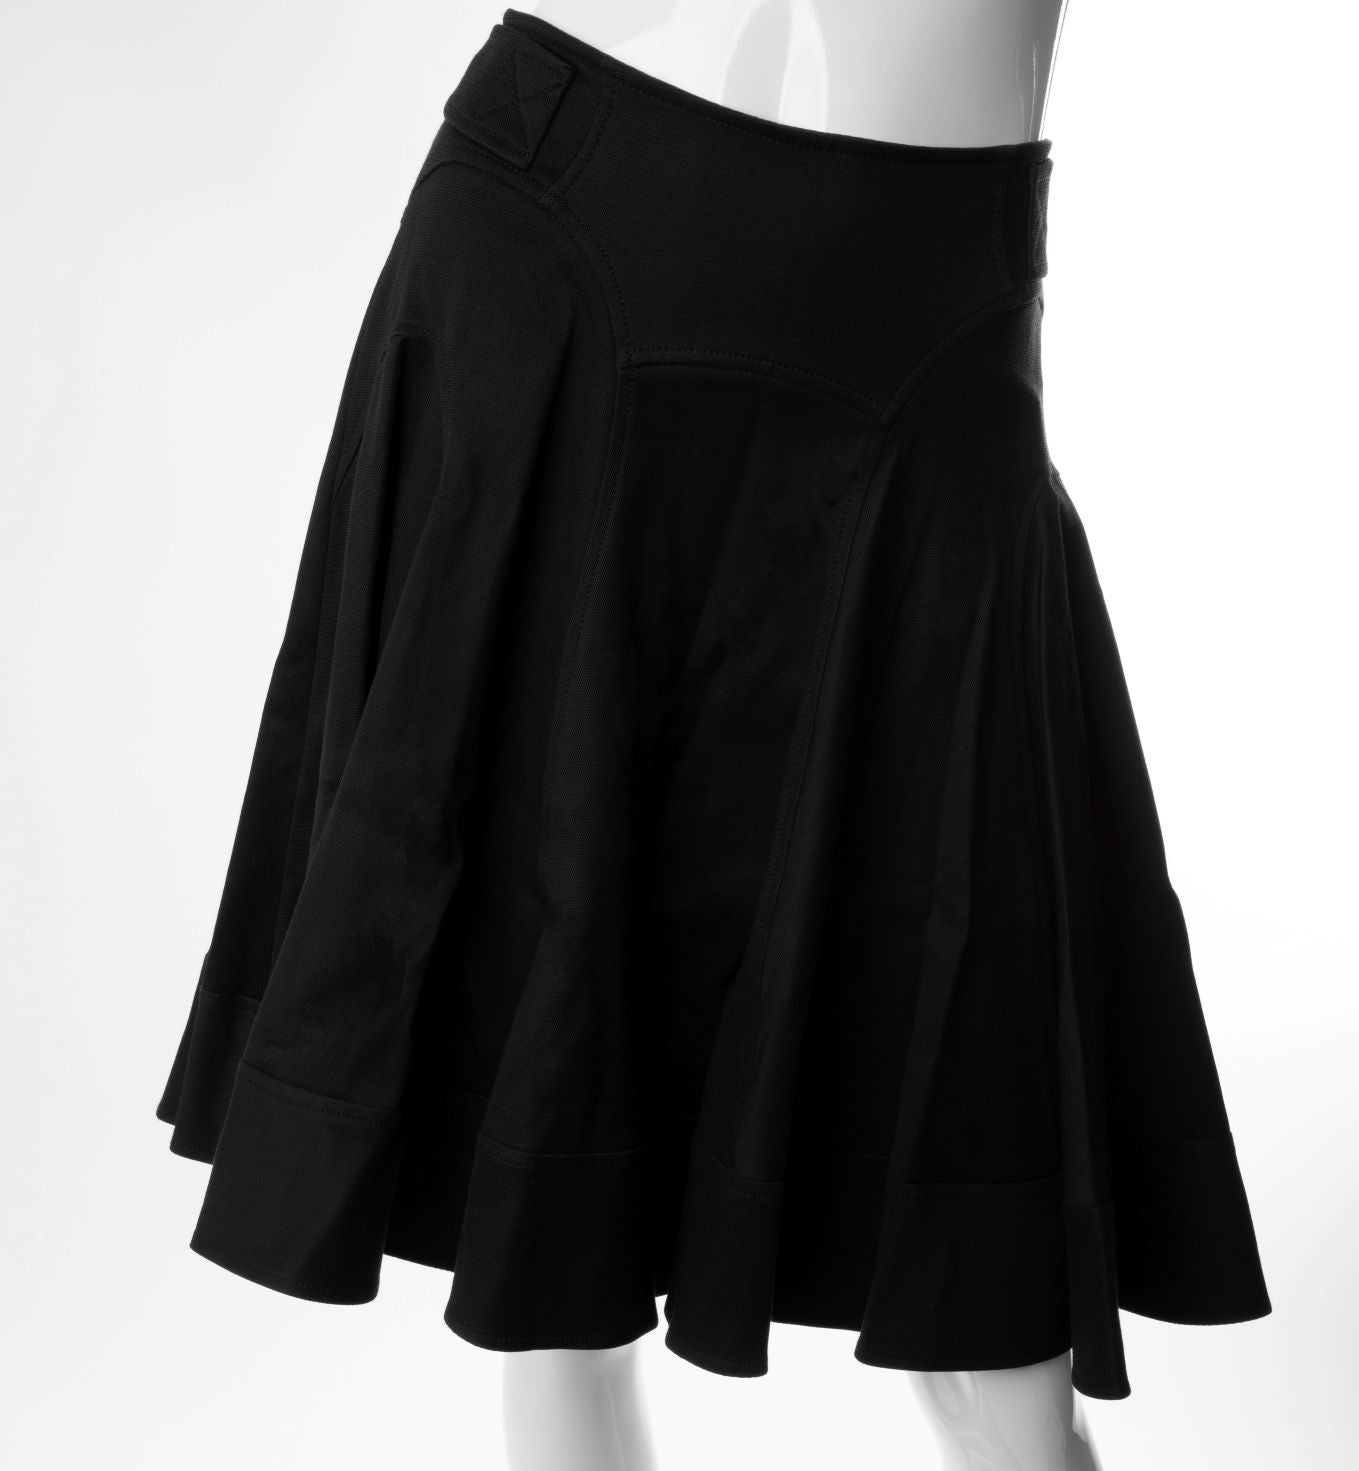 Dolce & Gabbana - Cotton Flair Skirt with Buckled Belts